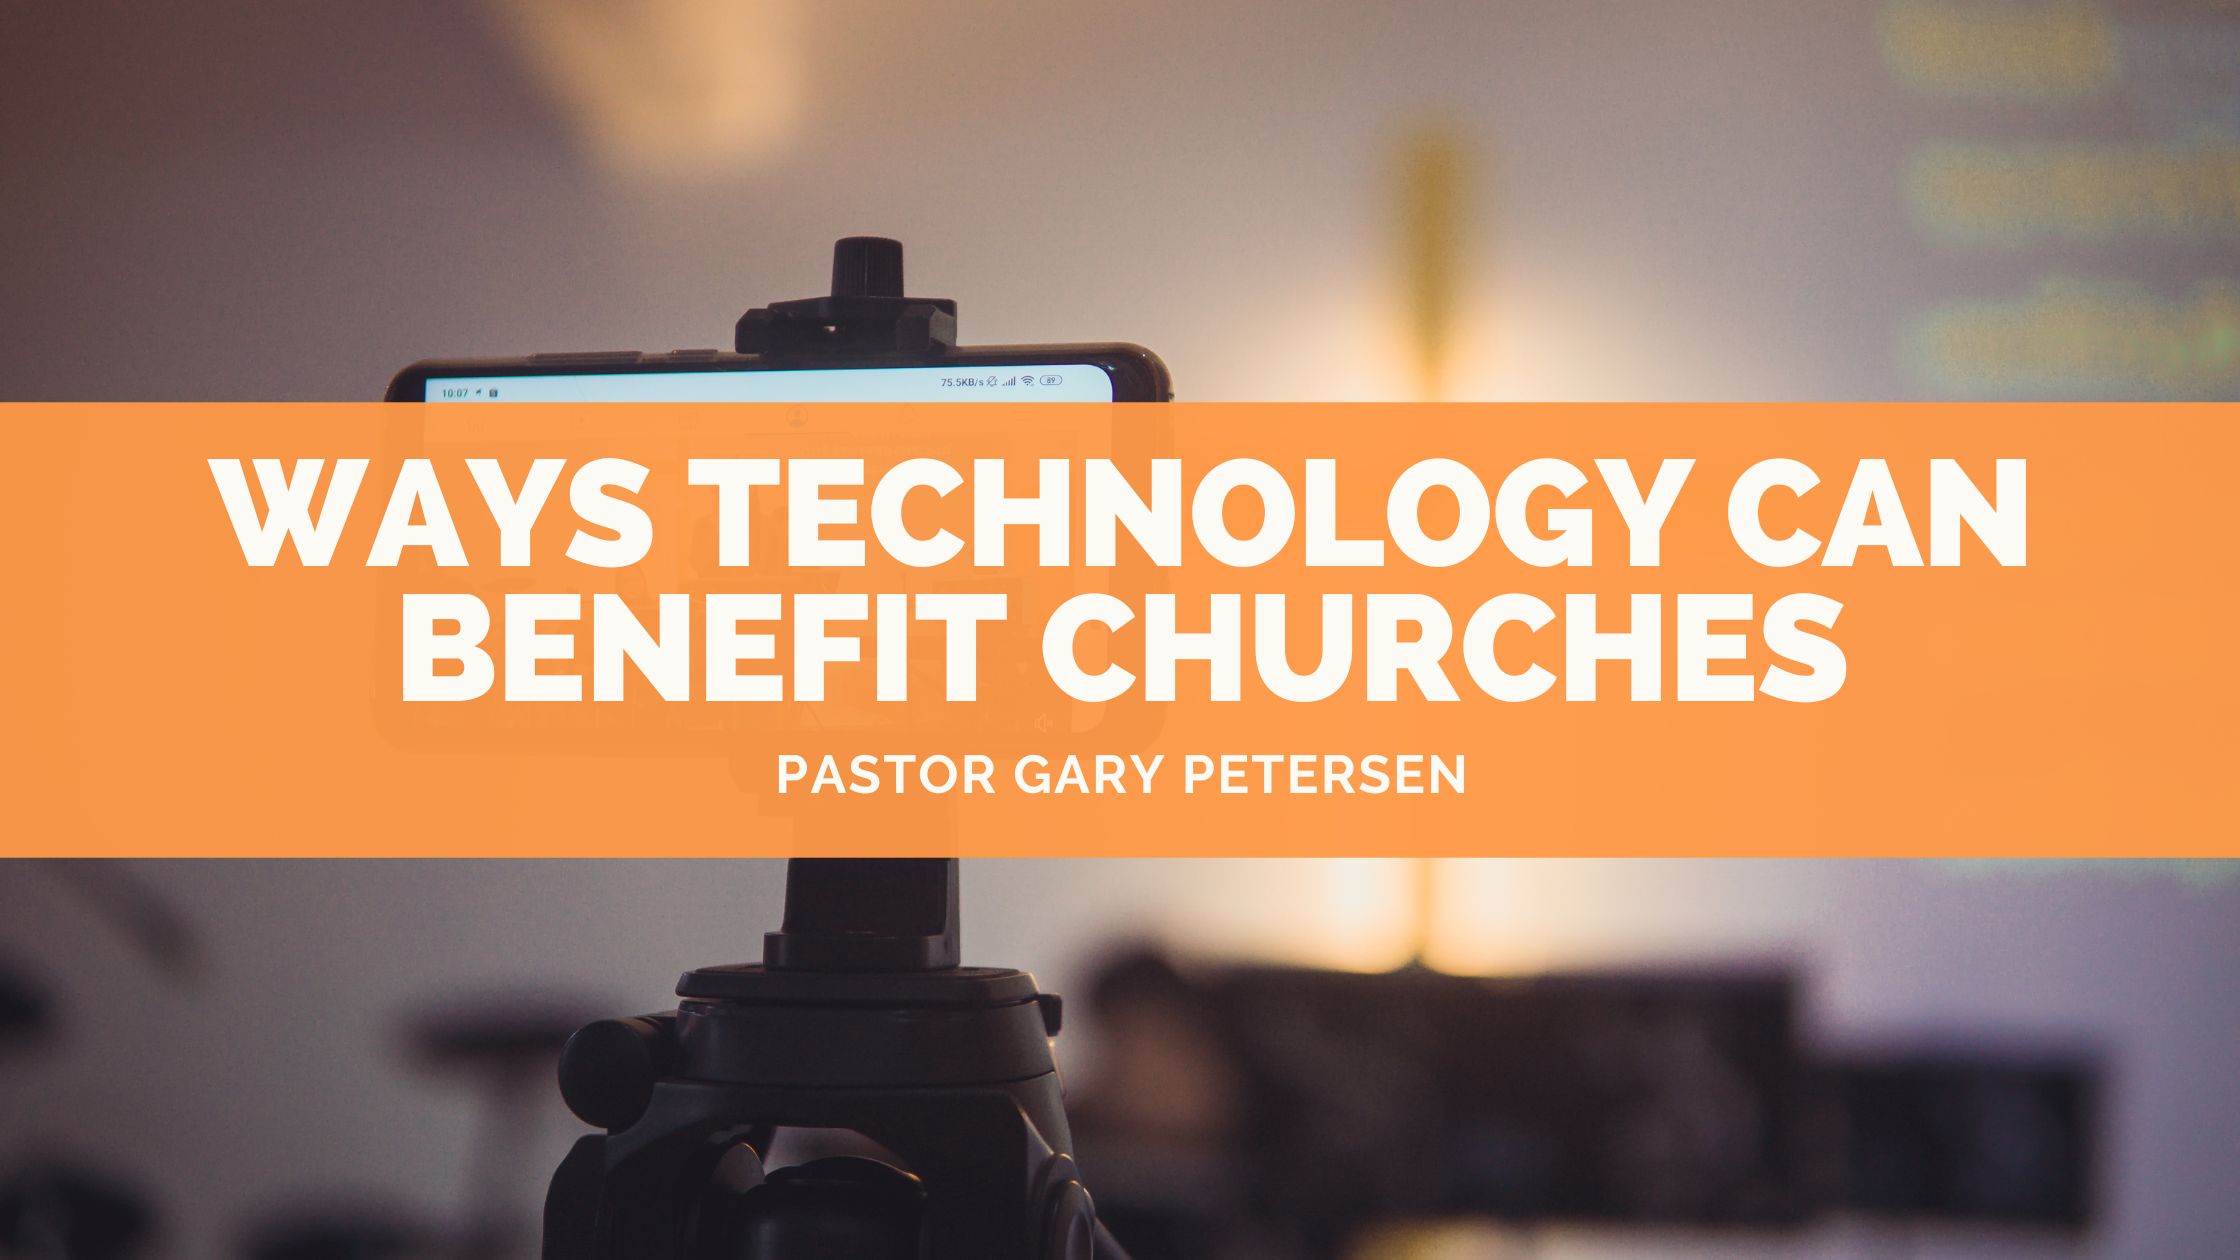 Ways Technology Can Benefit Churches